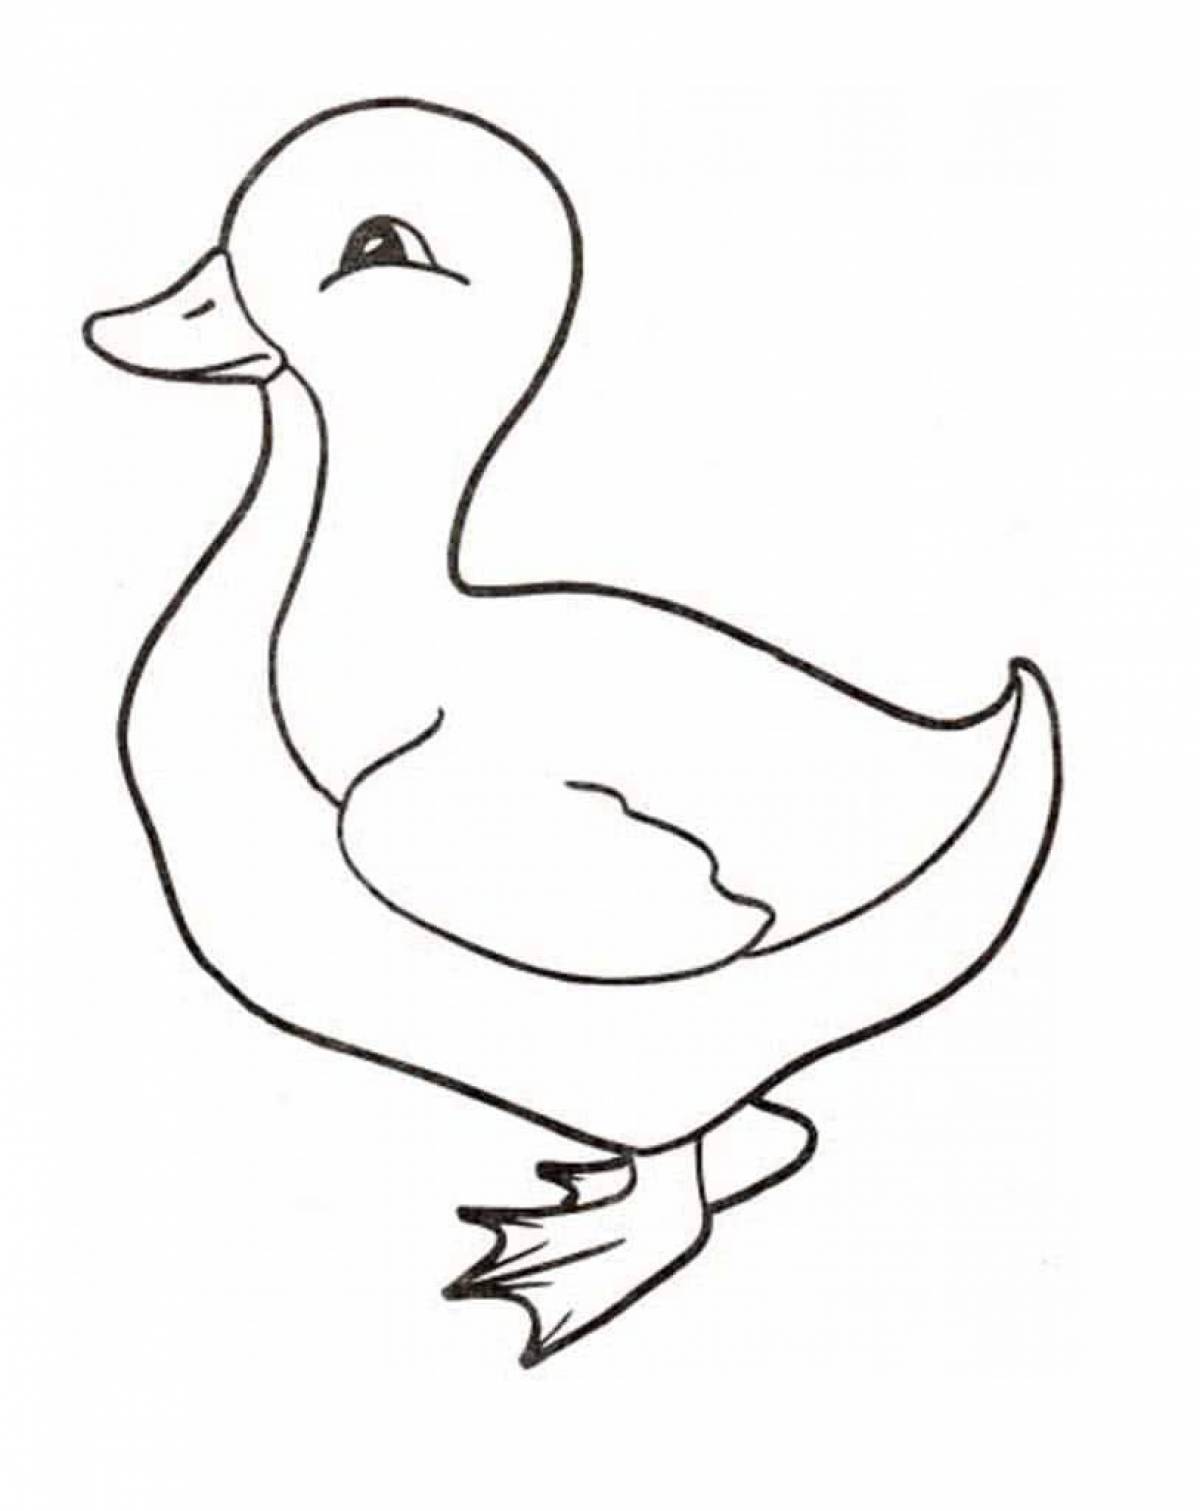 Lalafanfan dramatic duck coloring page